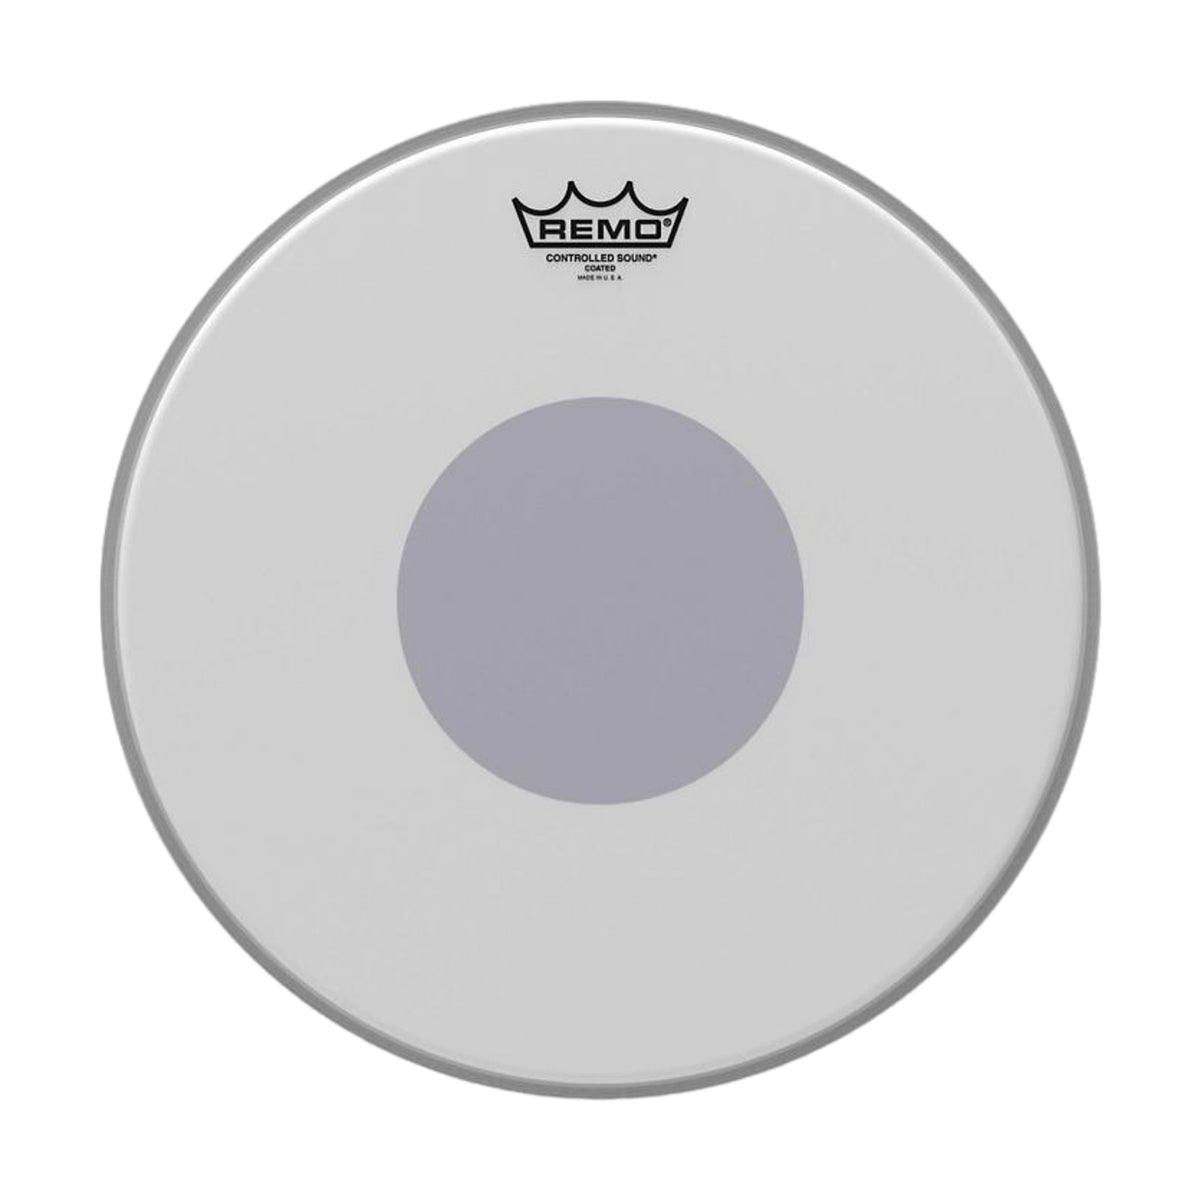 Remo 14 Inch Controlled Sound Coated Drum Head with Reverse Black Dot